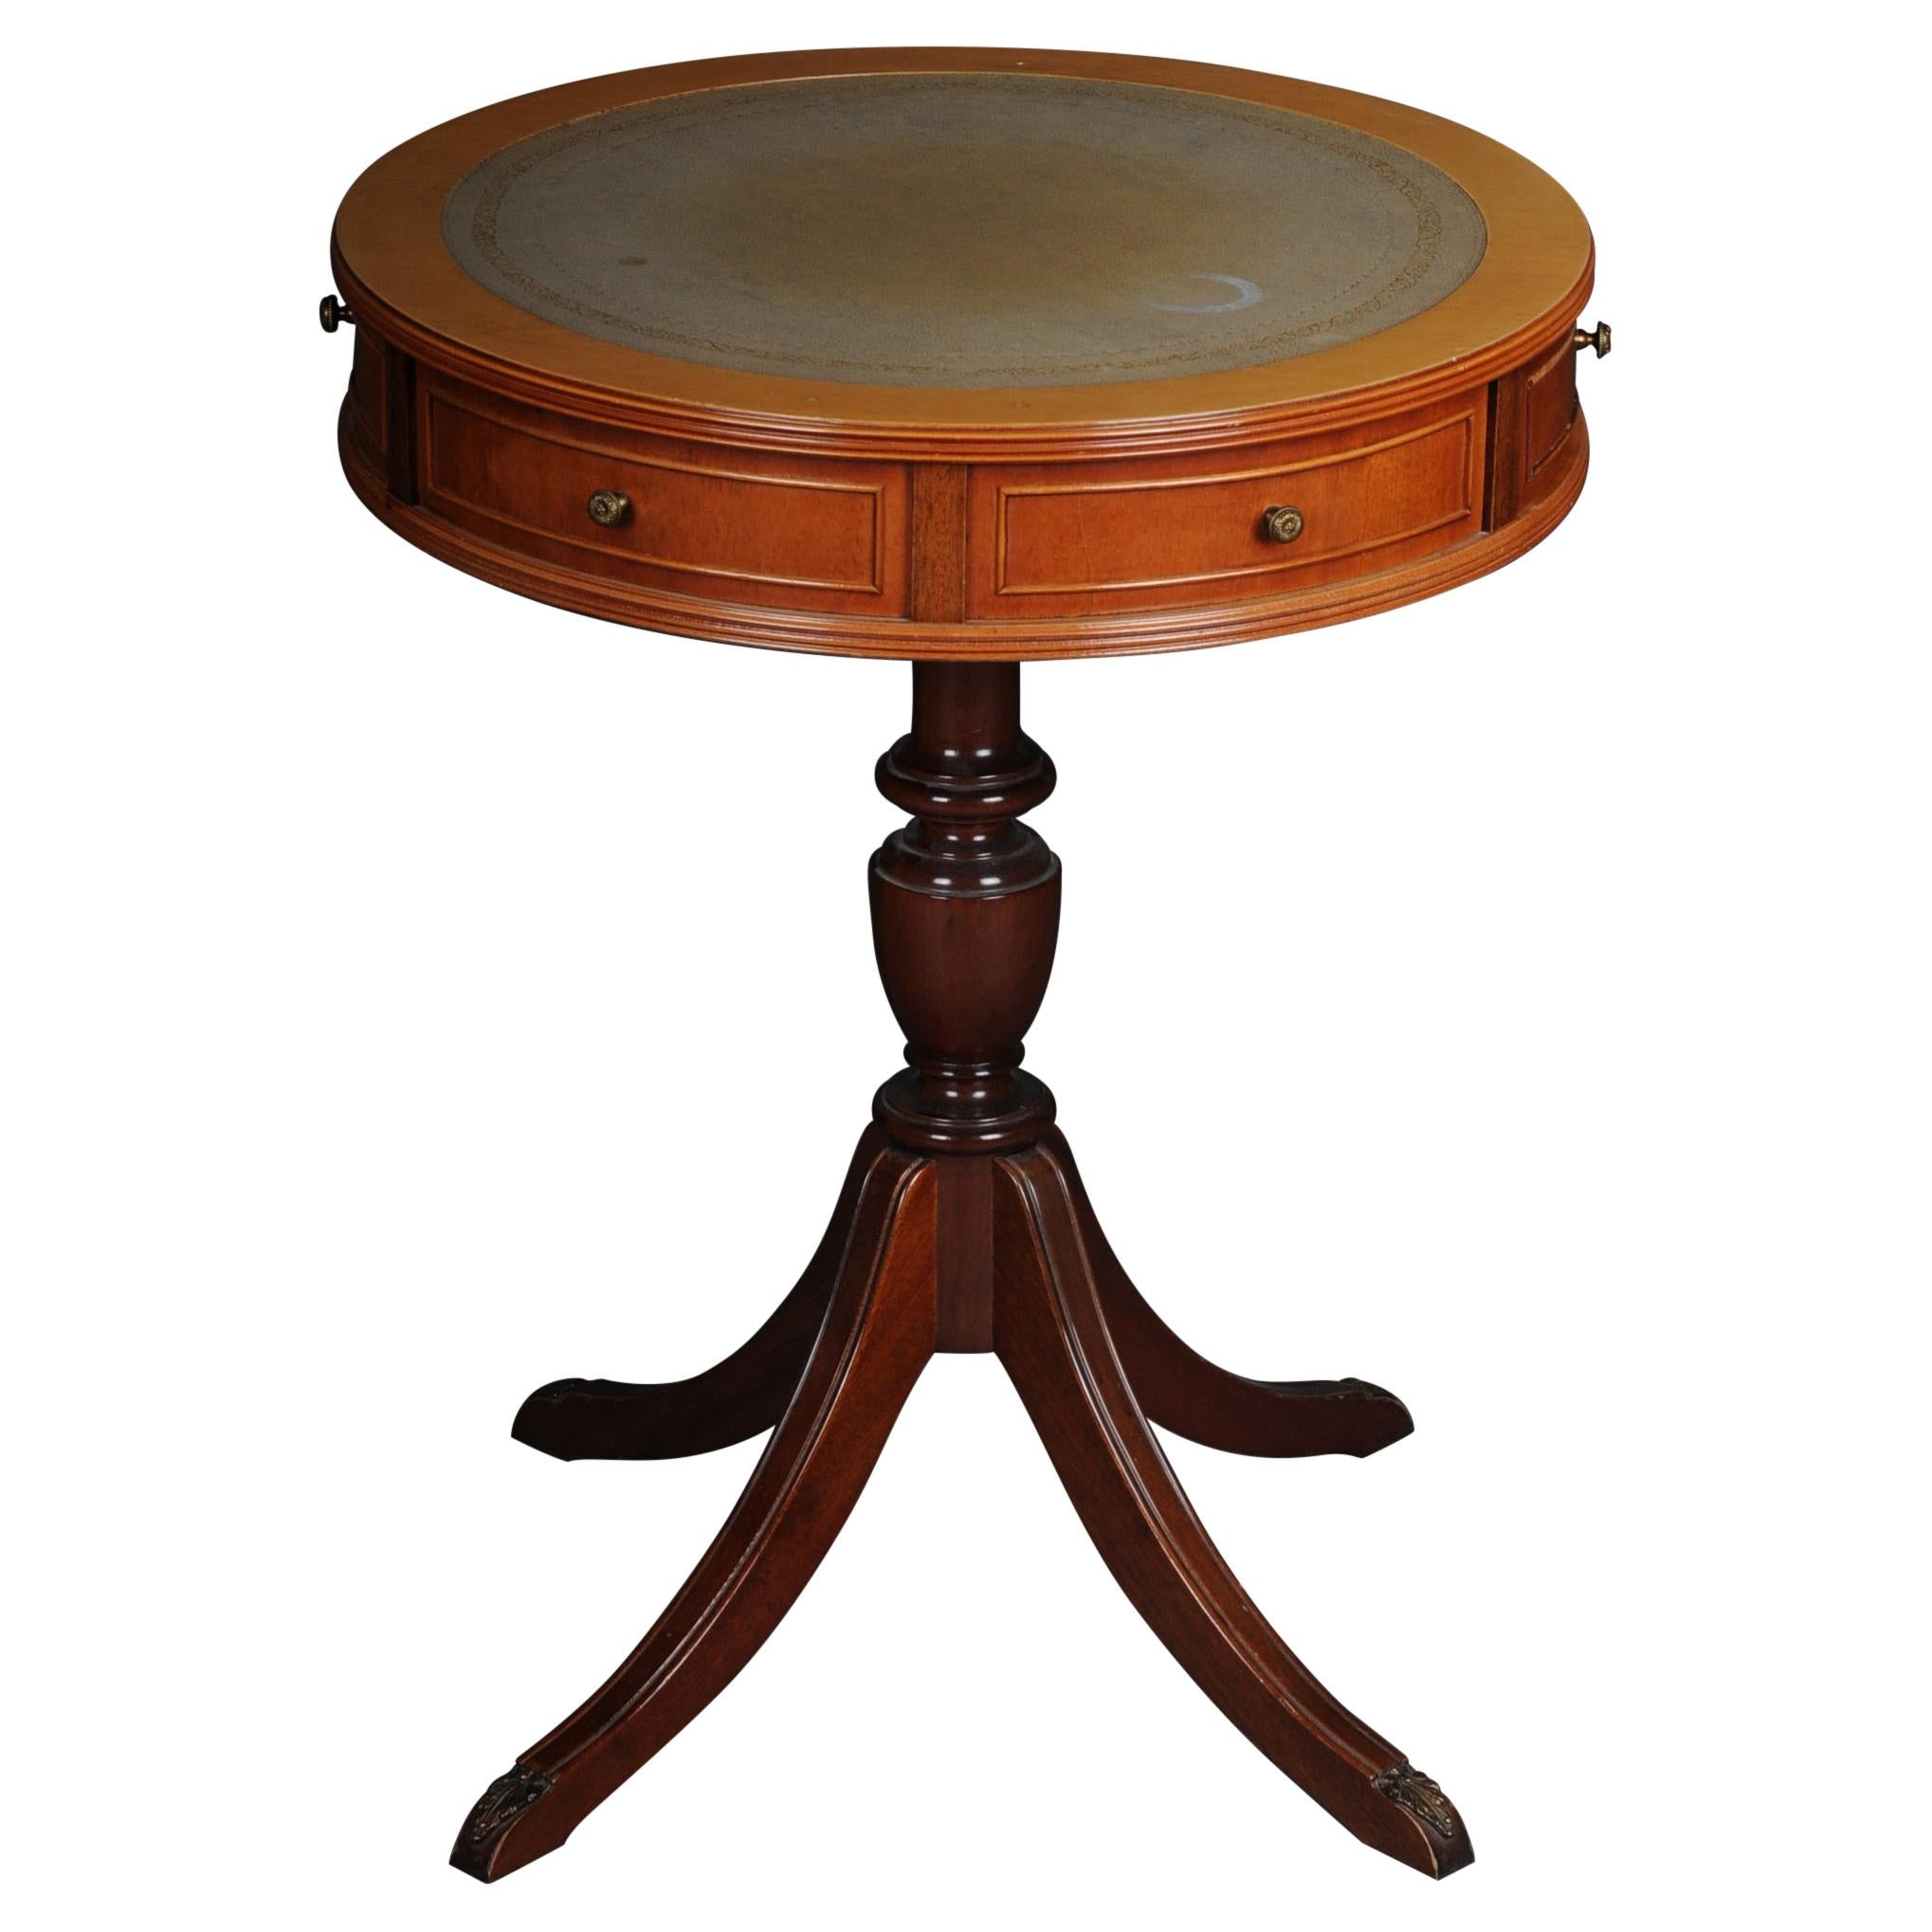 English Side Table / Table, 20th Century